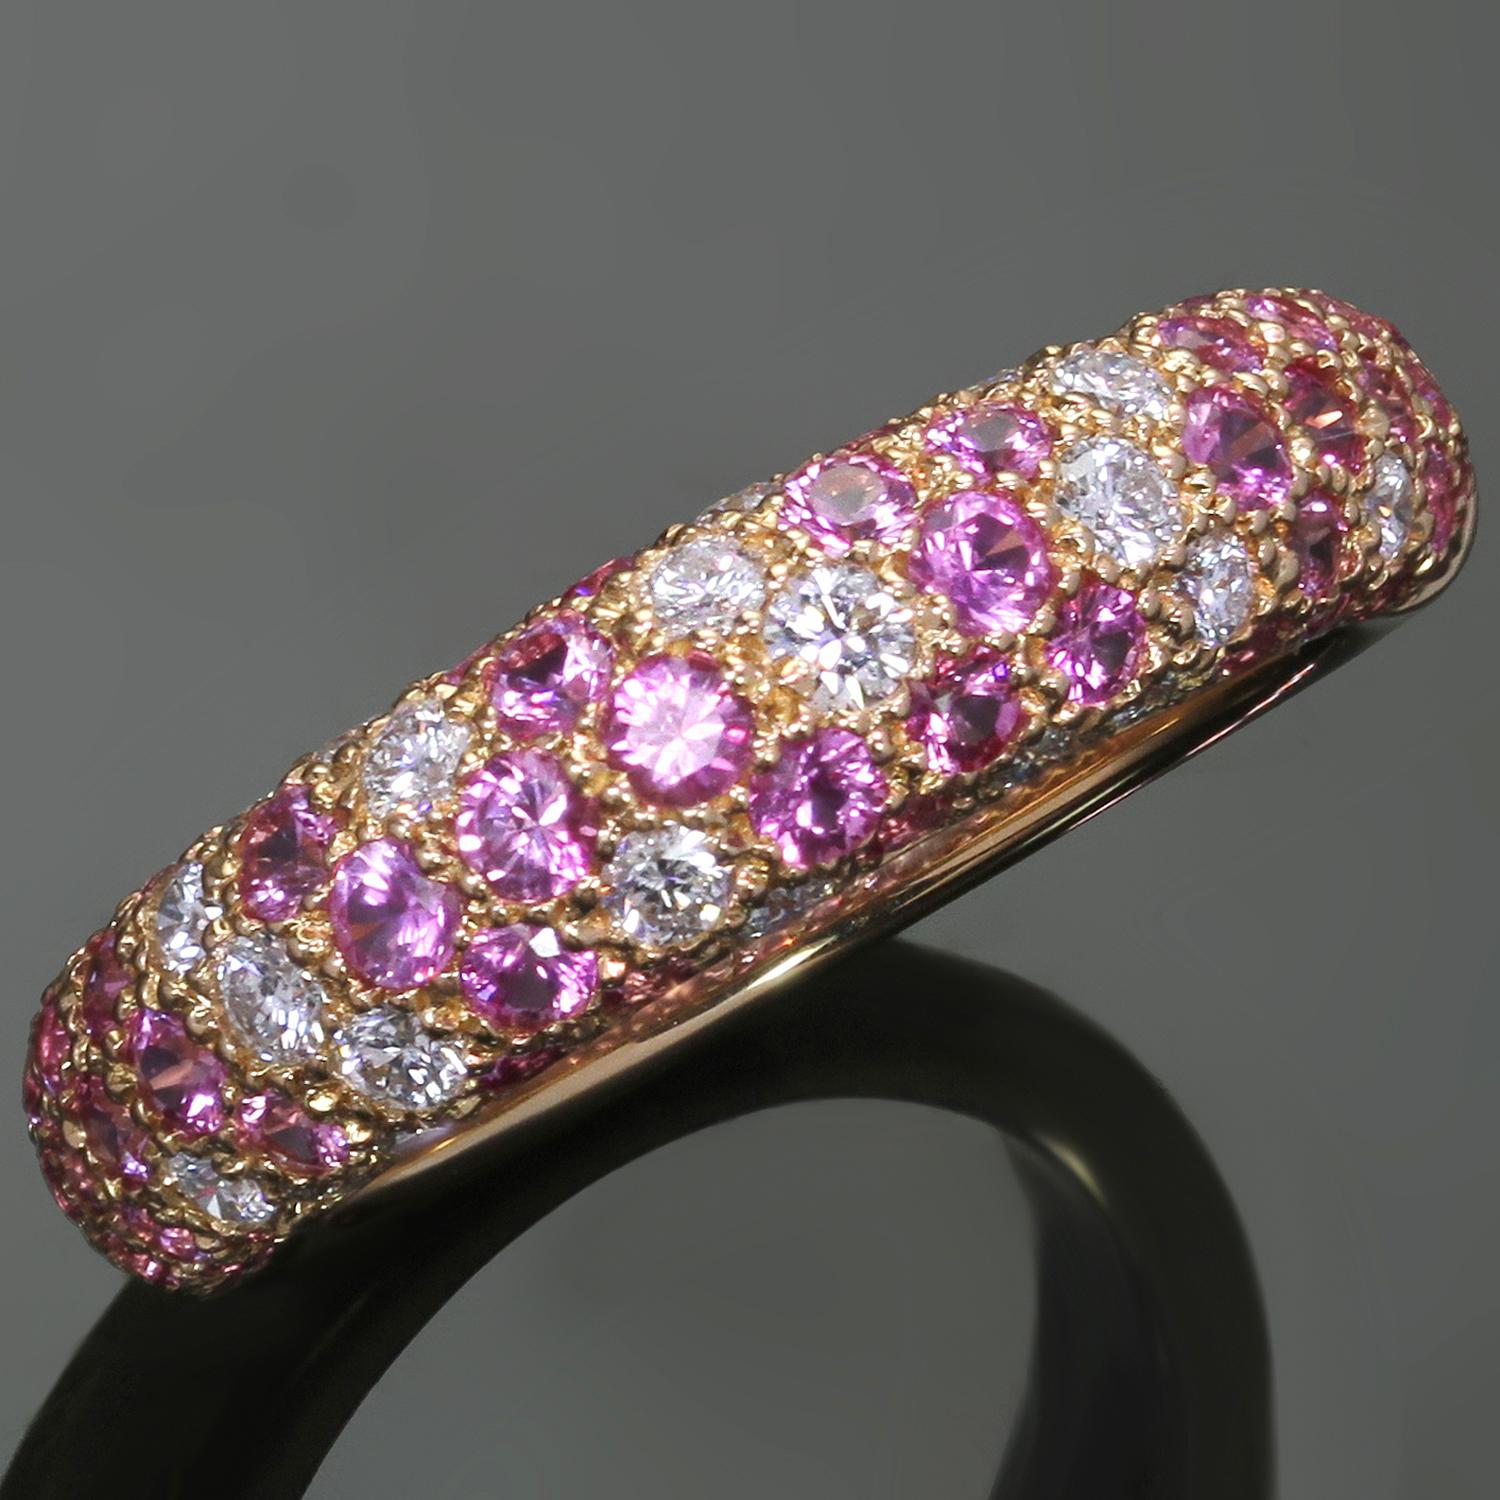 This stunning Cartier band from the elegant Etincelle de Cartier collection is crafted in 18k rose gold and set with brilliant-cut round diamonds and round faceted pink sapphires. Made in France circa 2000s. Measurements: 0.23